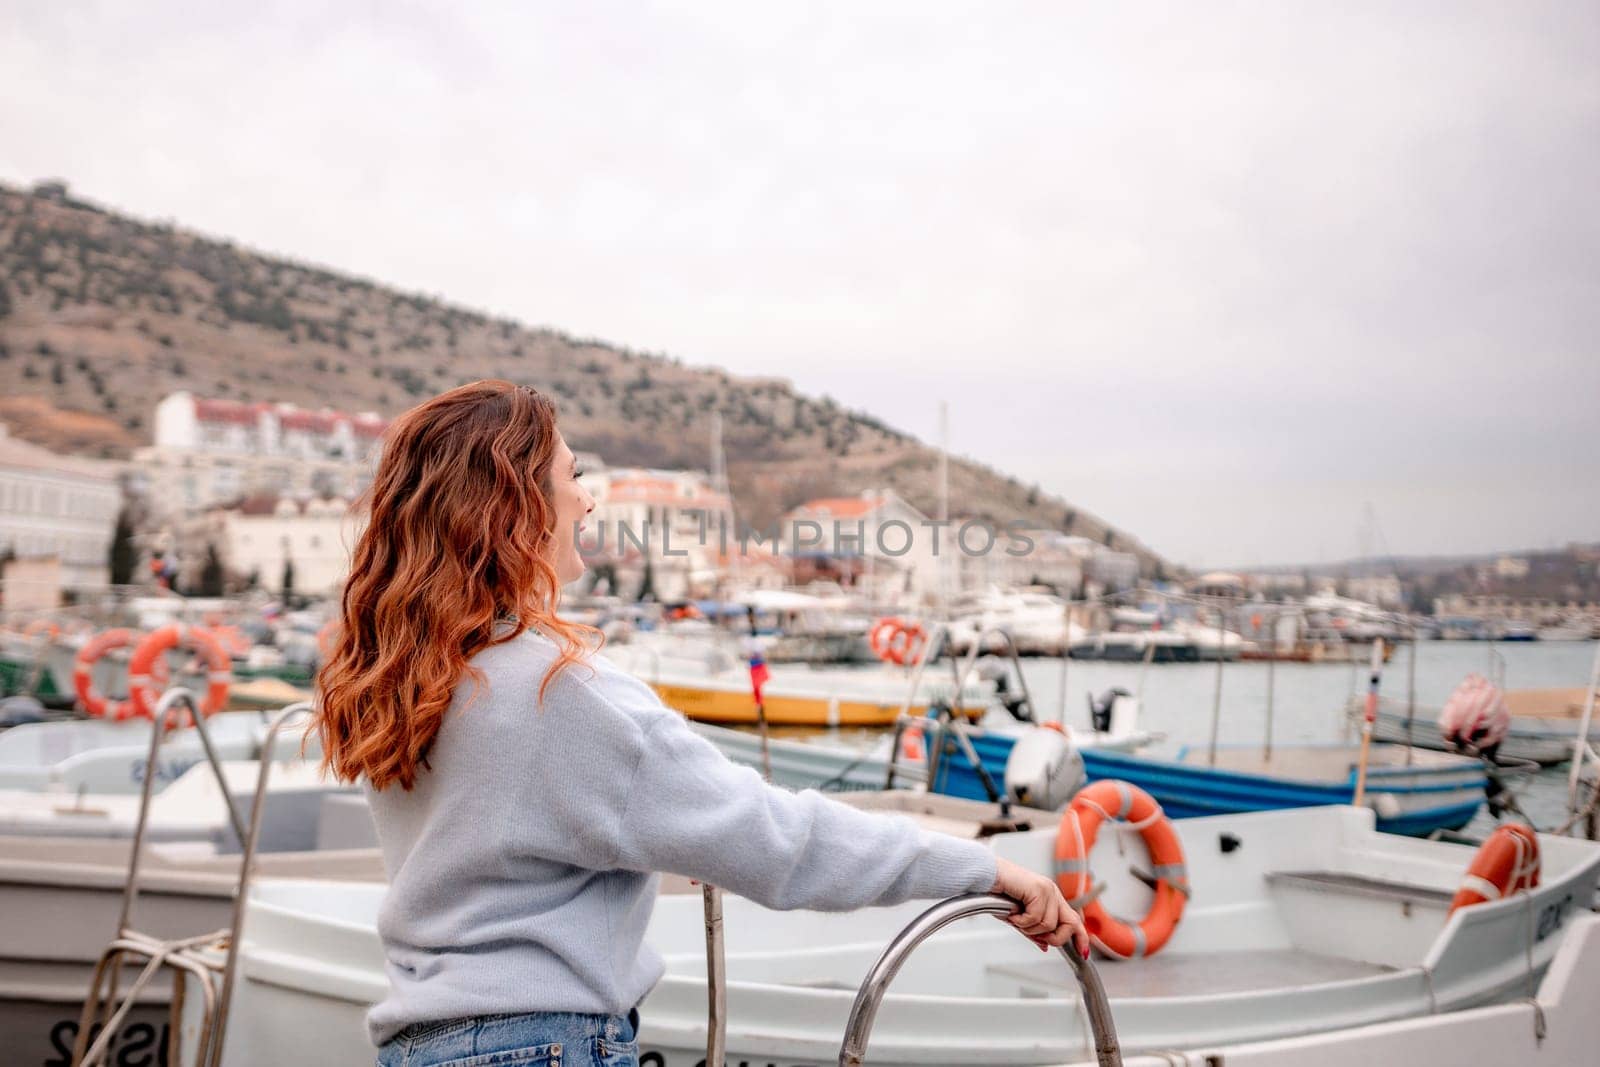 A woman stands in front of a row of boats, some of which have orange life preservers on them. The scene is peaceful and serene, with the boats and the woman creating a sense of calmness and relaxation